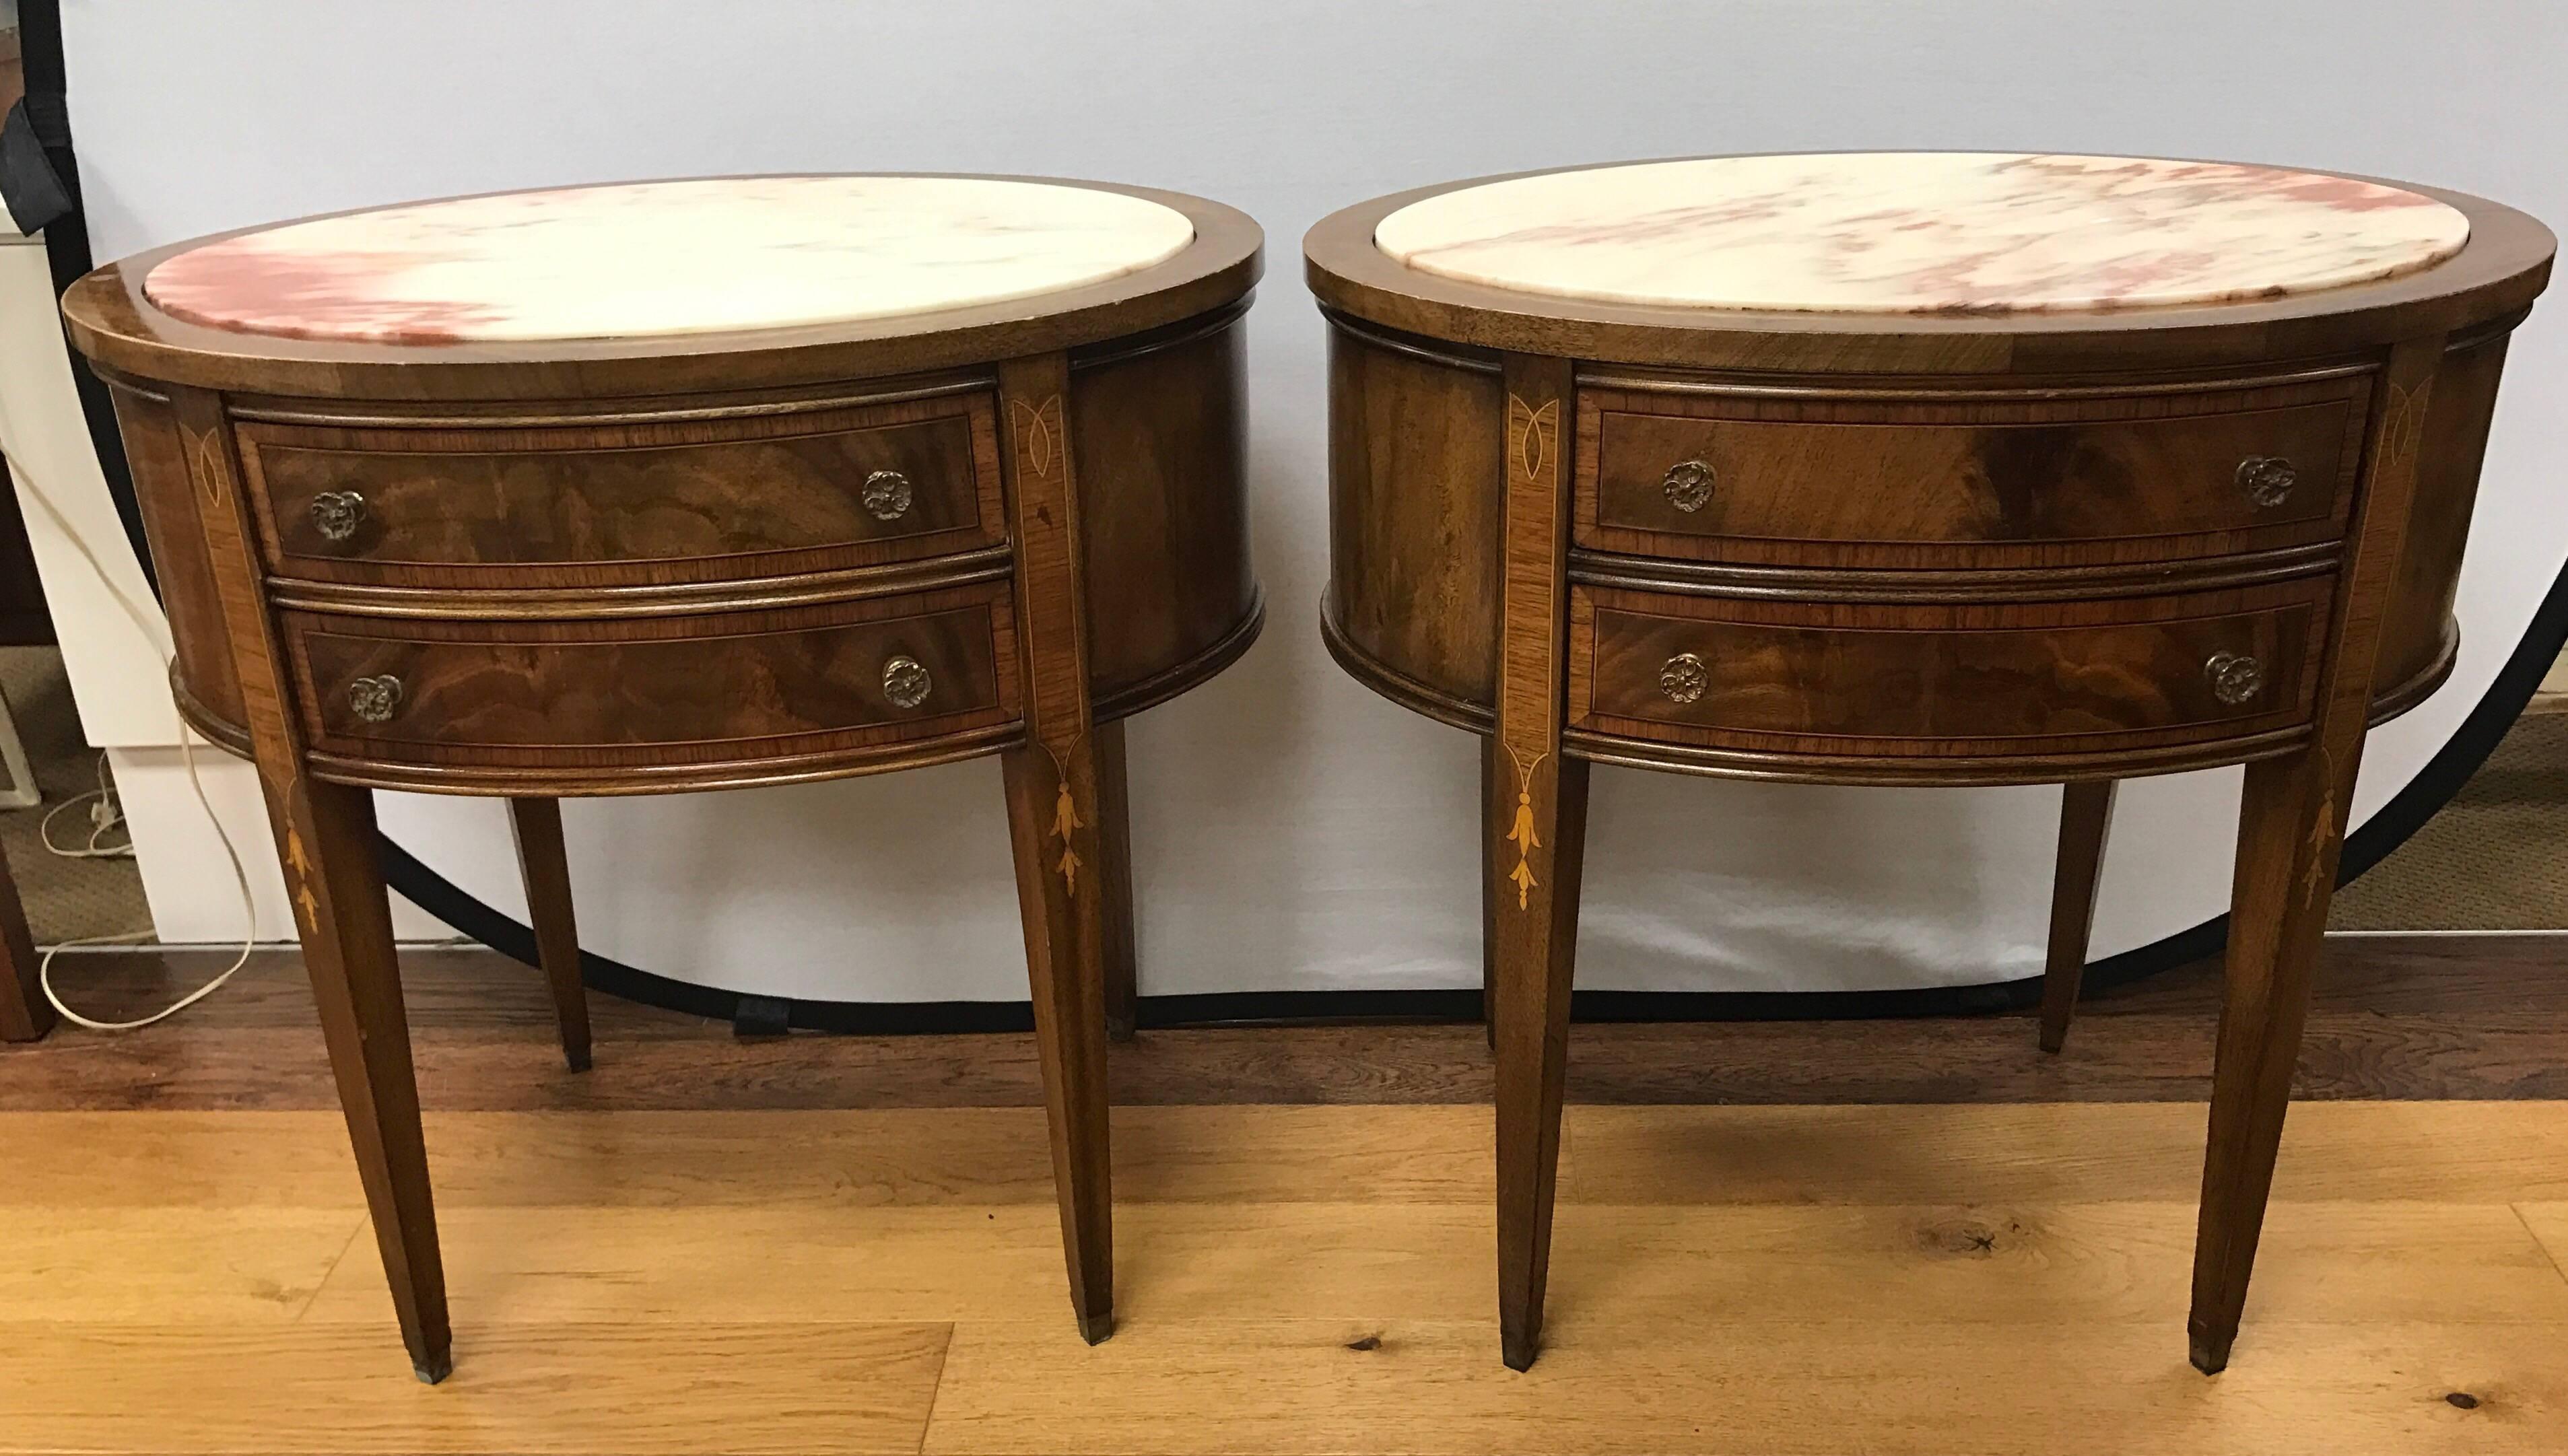 Pair of French mahogany two-drawer oval tables with inset marble tops and bell flower inlay.